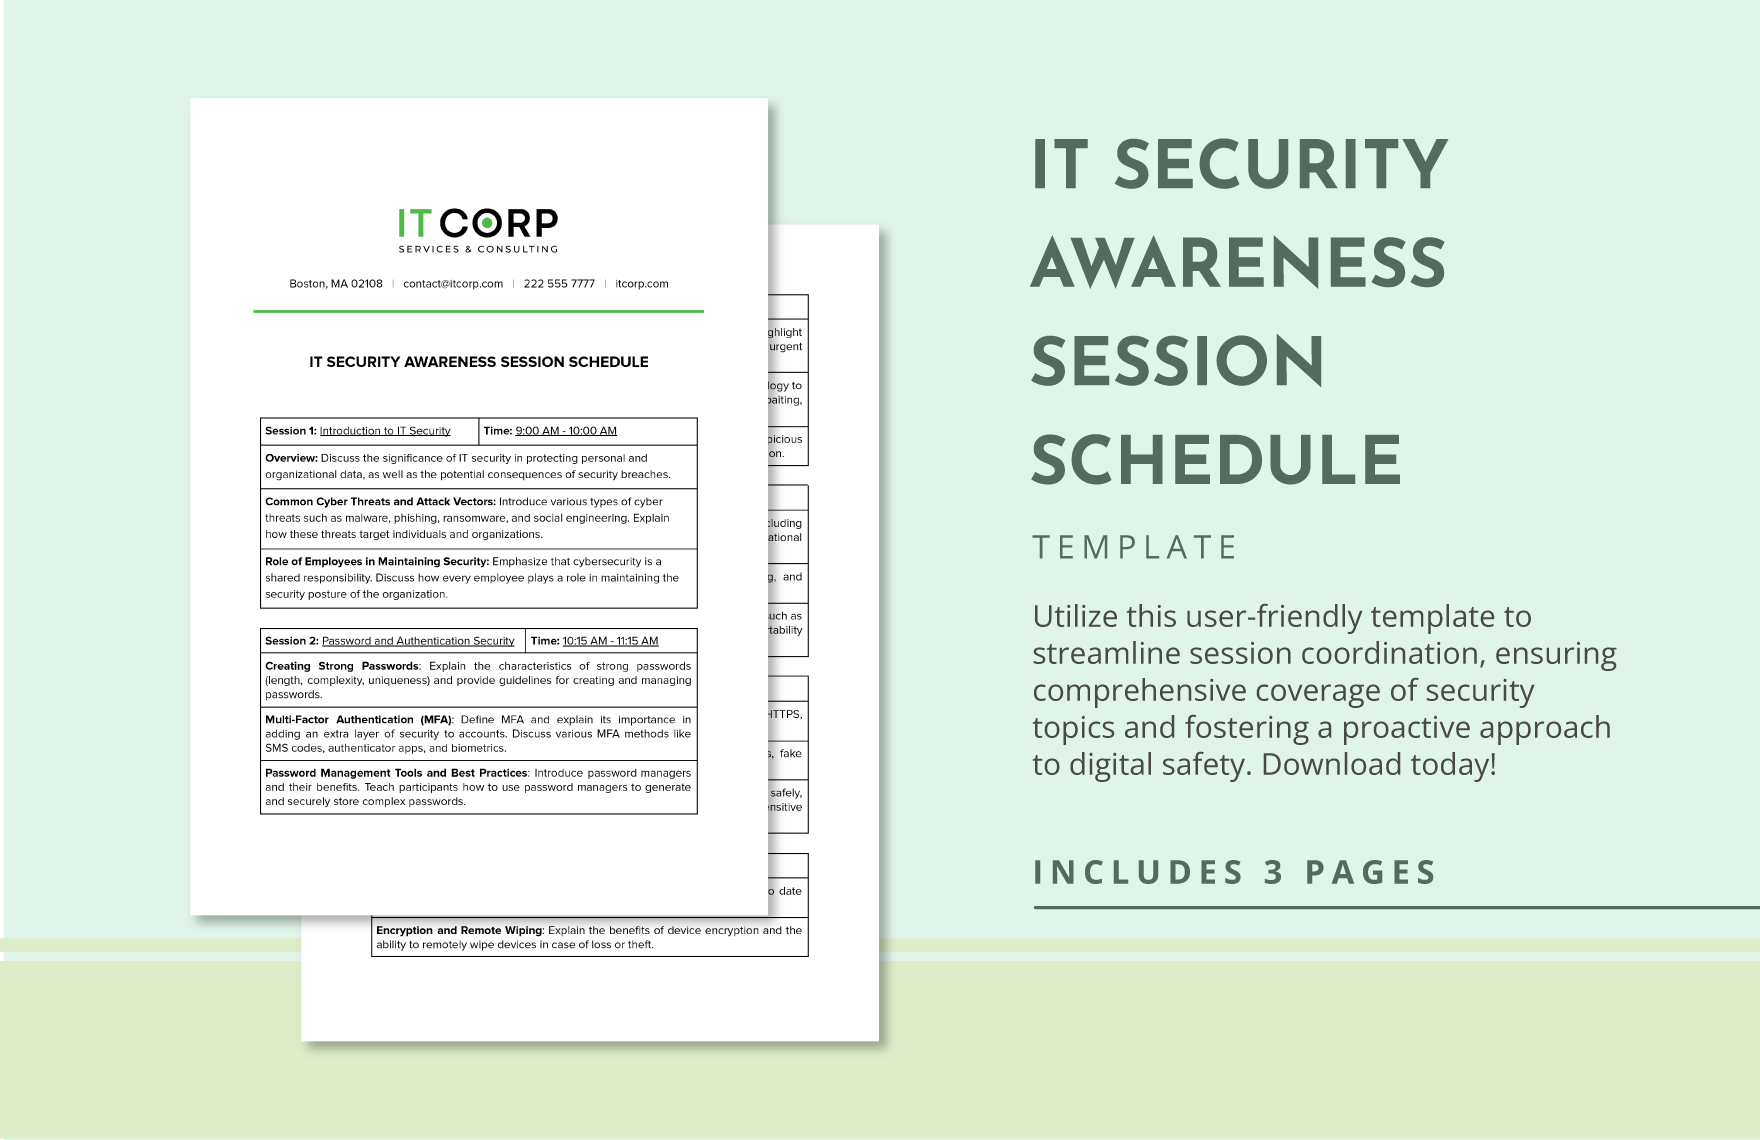 IT Security Awareness Session Schedule Template